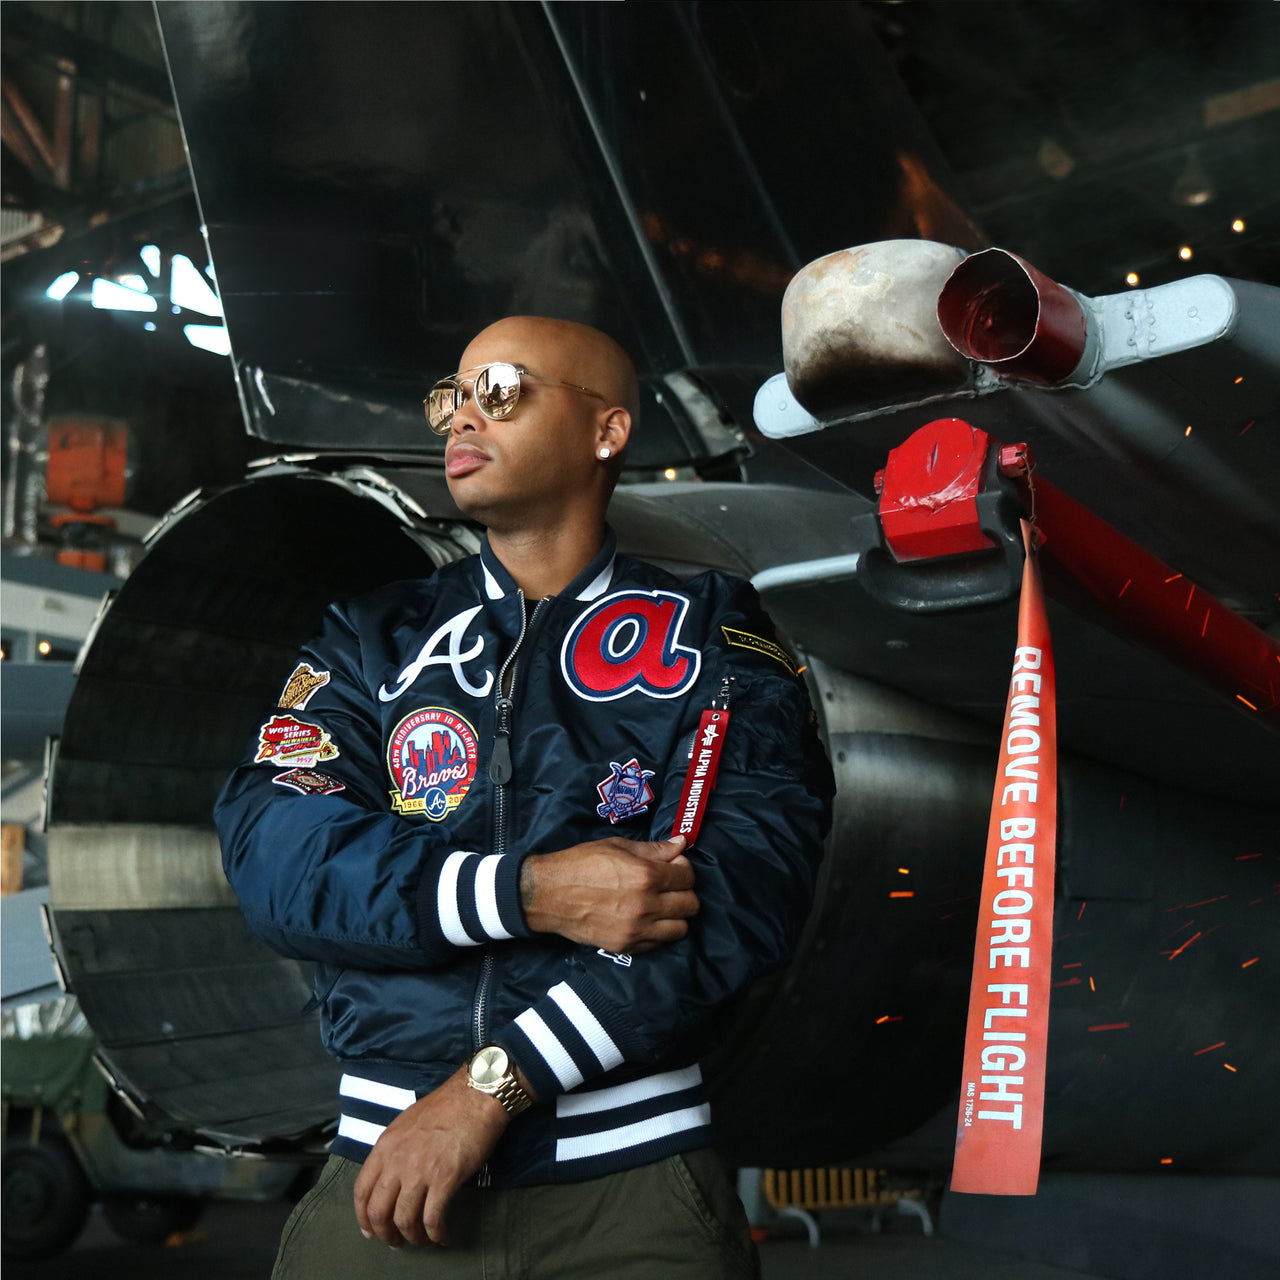 The Atlanta Braves MLB Patch Alpha Industries Reversible Bomber Jacket With Camo Liner | Navy Blue Bomber Jacket in front of a jet